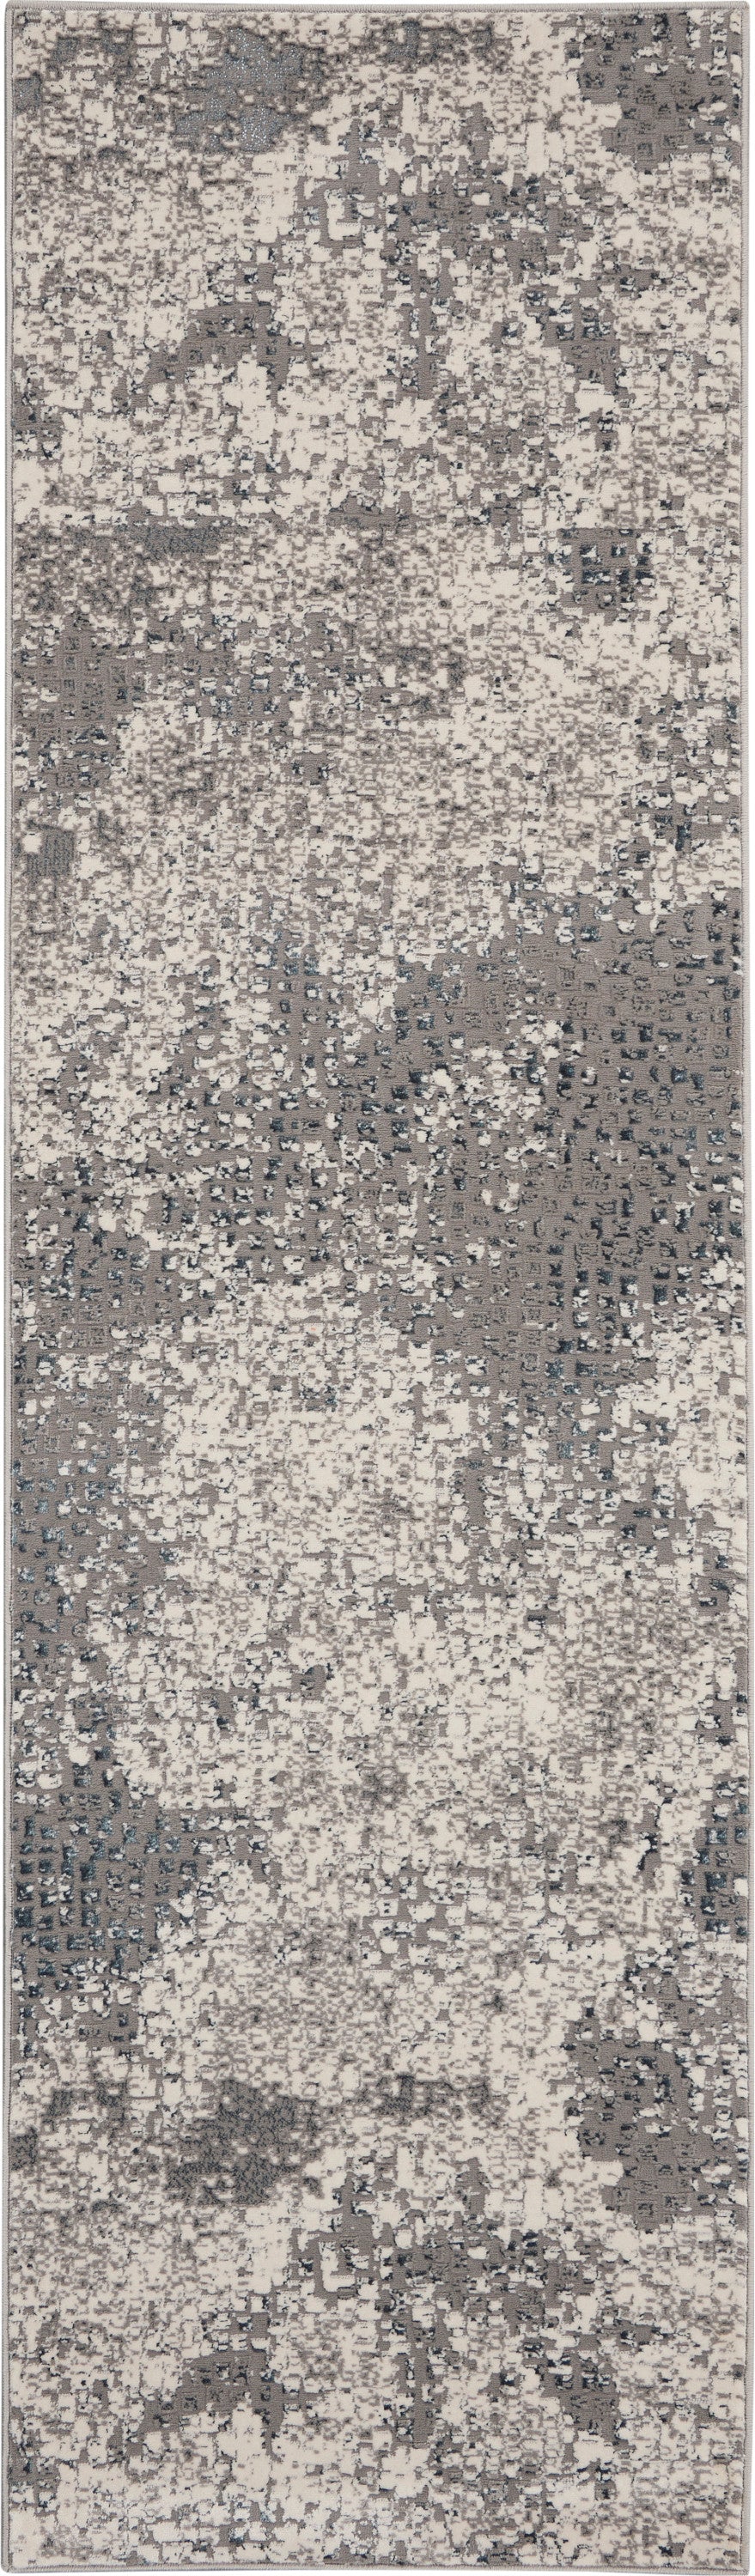 Michael Amini MA90 Uptown UPT02 Ivory Grey Contemporary Machinemade Rug